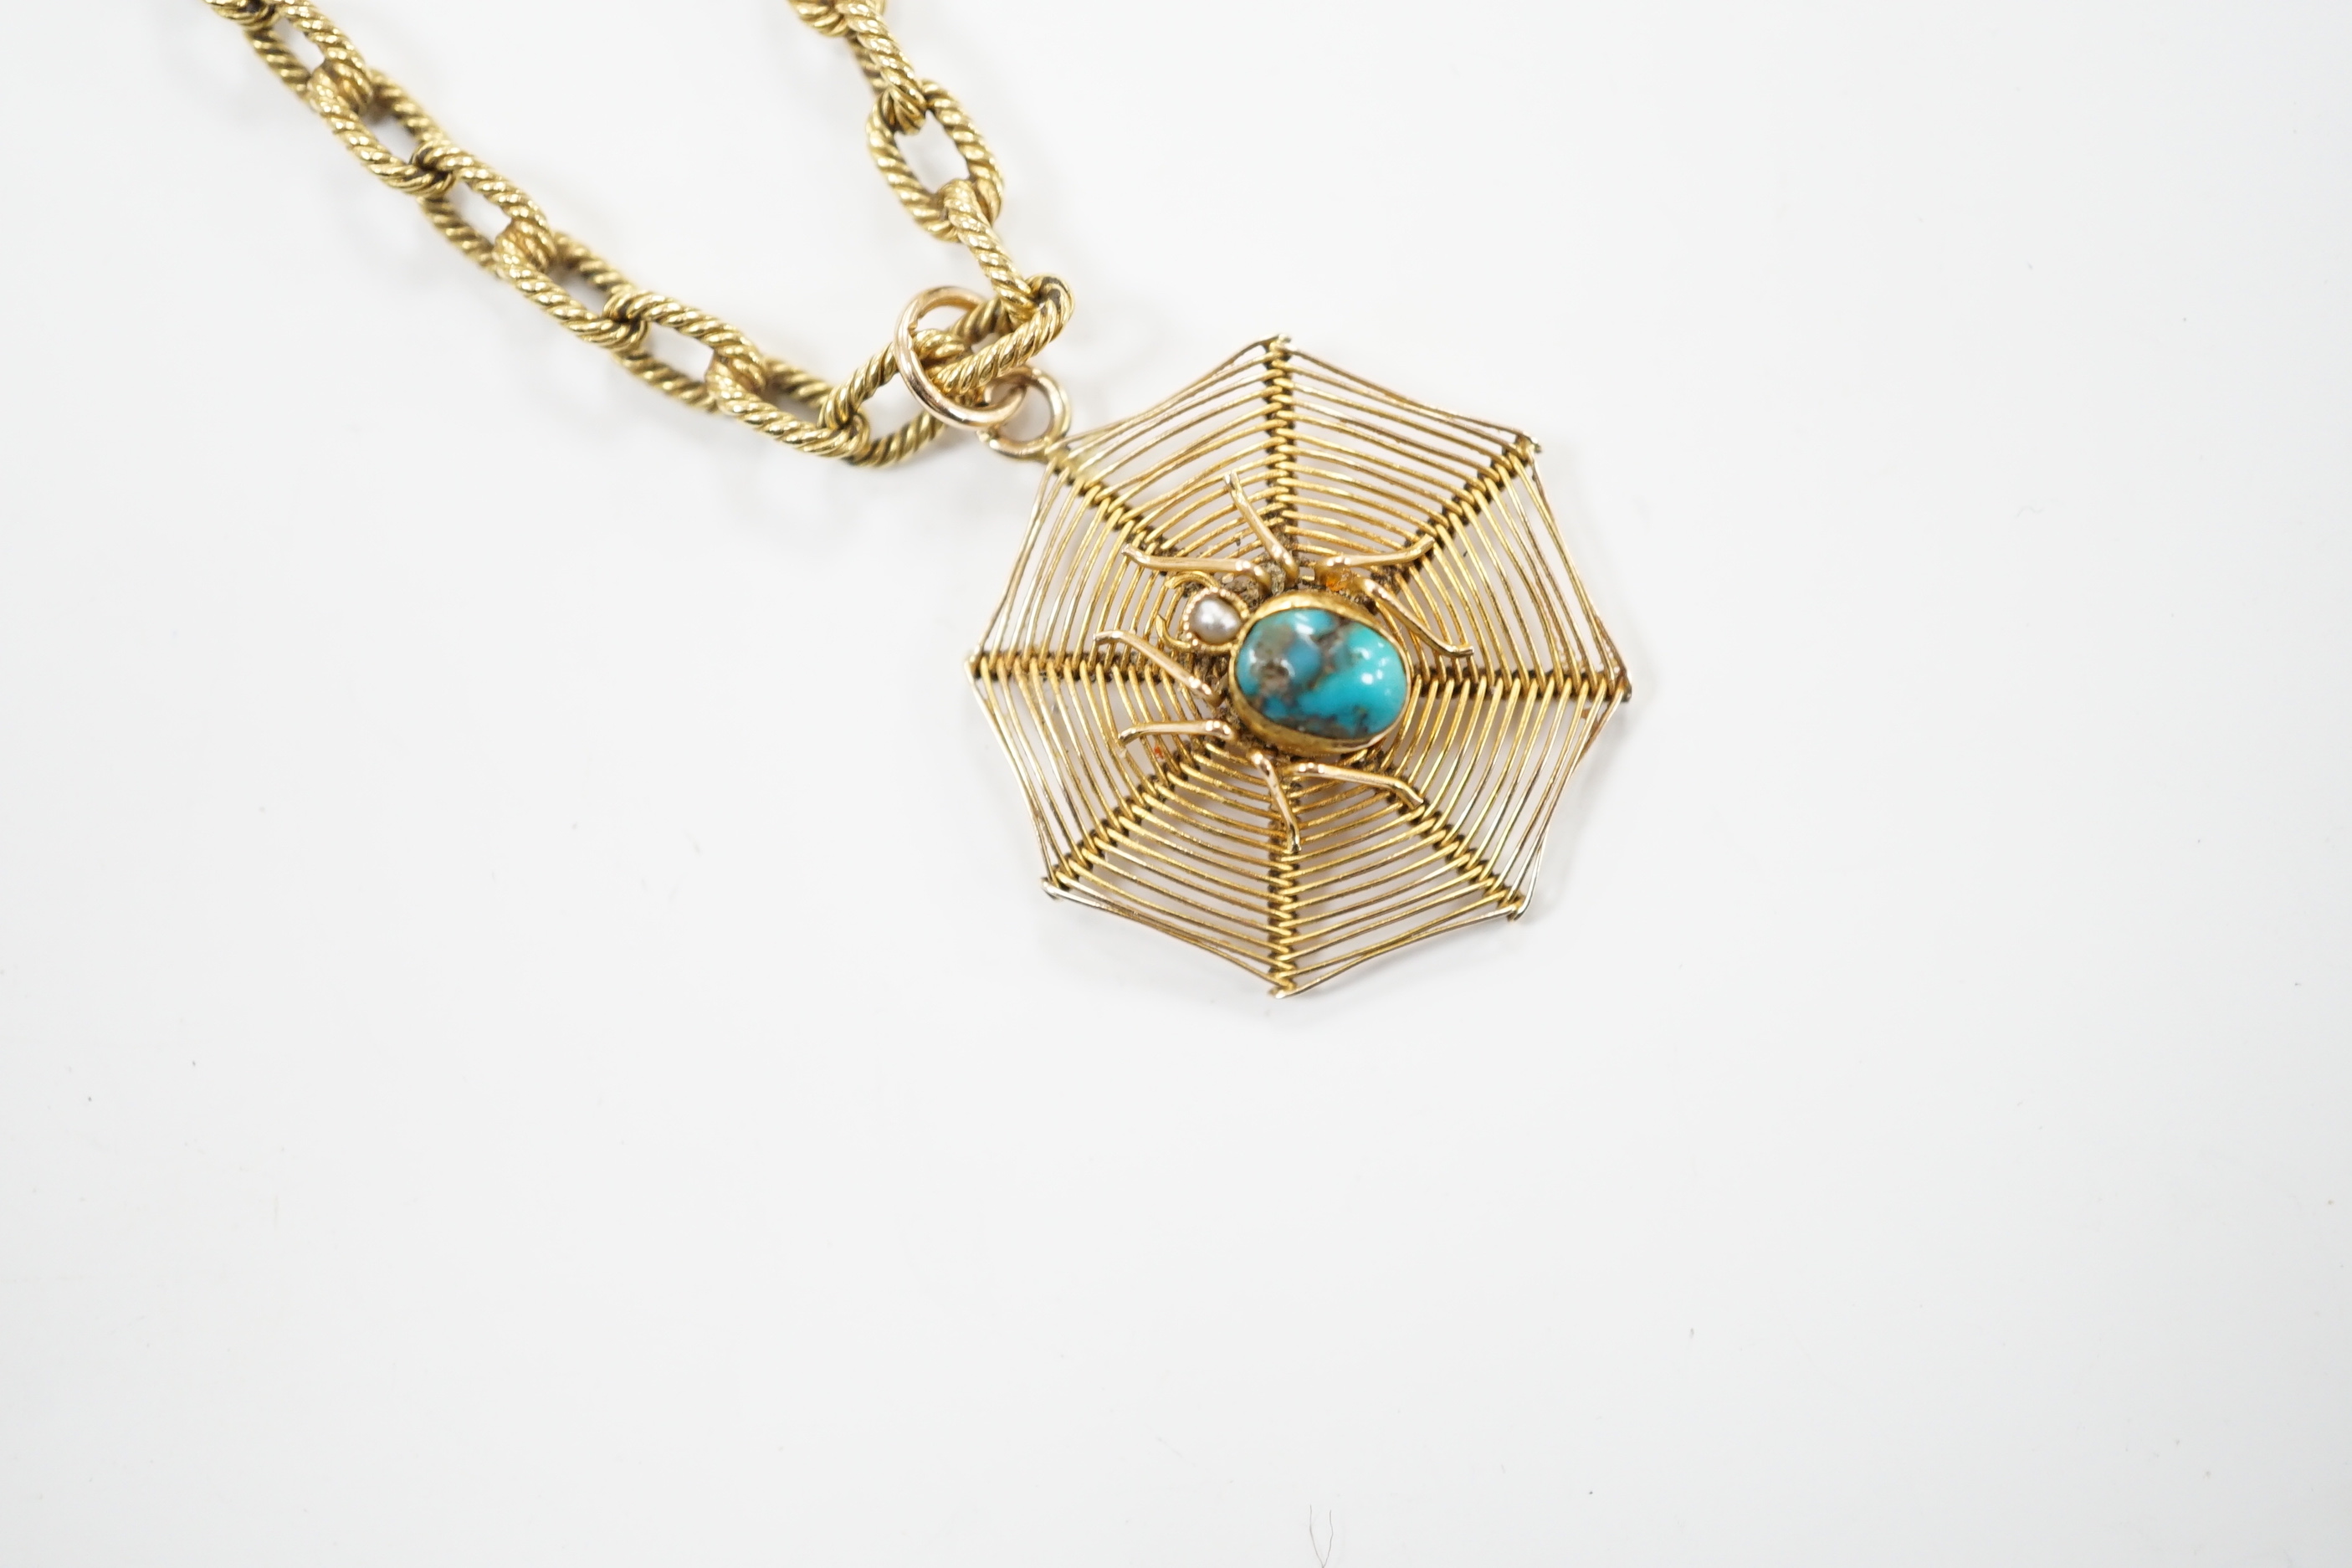 An early 20th century 9ct, turquoise and seed pearl set 'spider and web' pendant, 30mm, on a yellow metal chain, stamped 18 and numbered 2312, one link bearing the engraved word 'Cartier', 58cm, gross weight 23.2 grams.